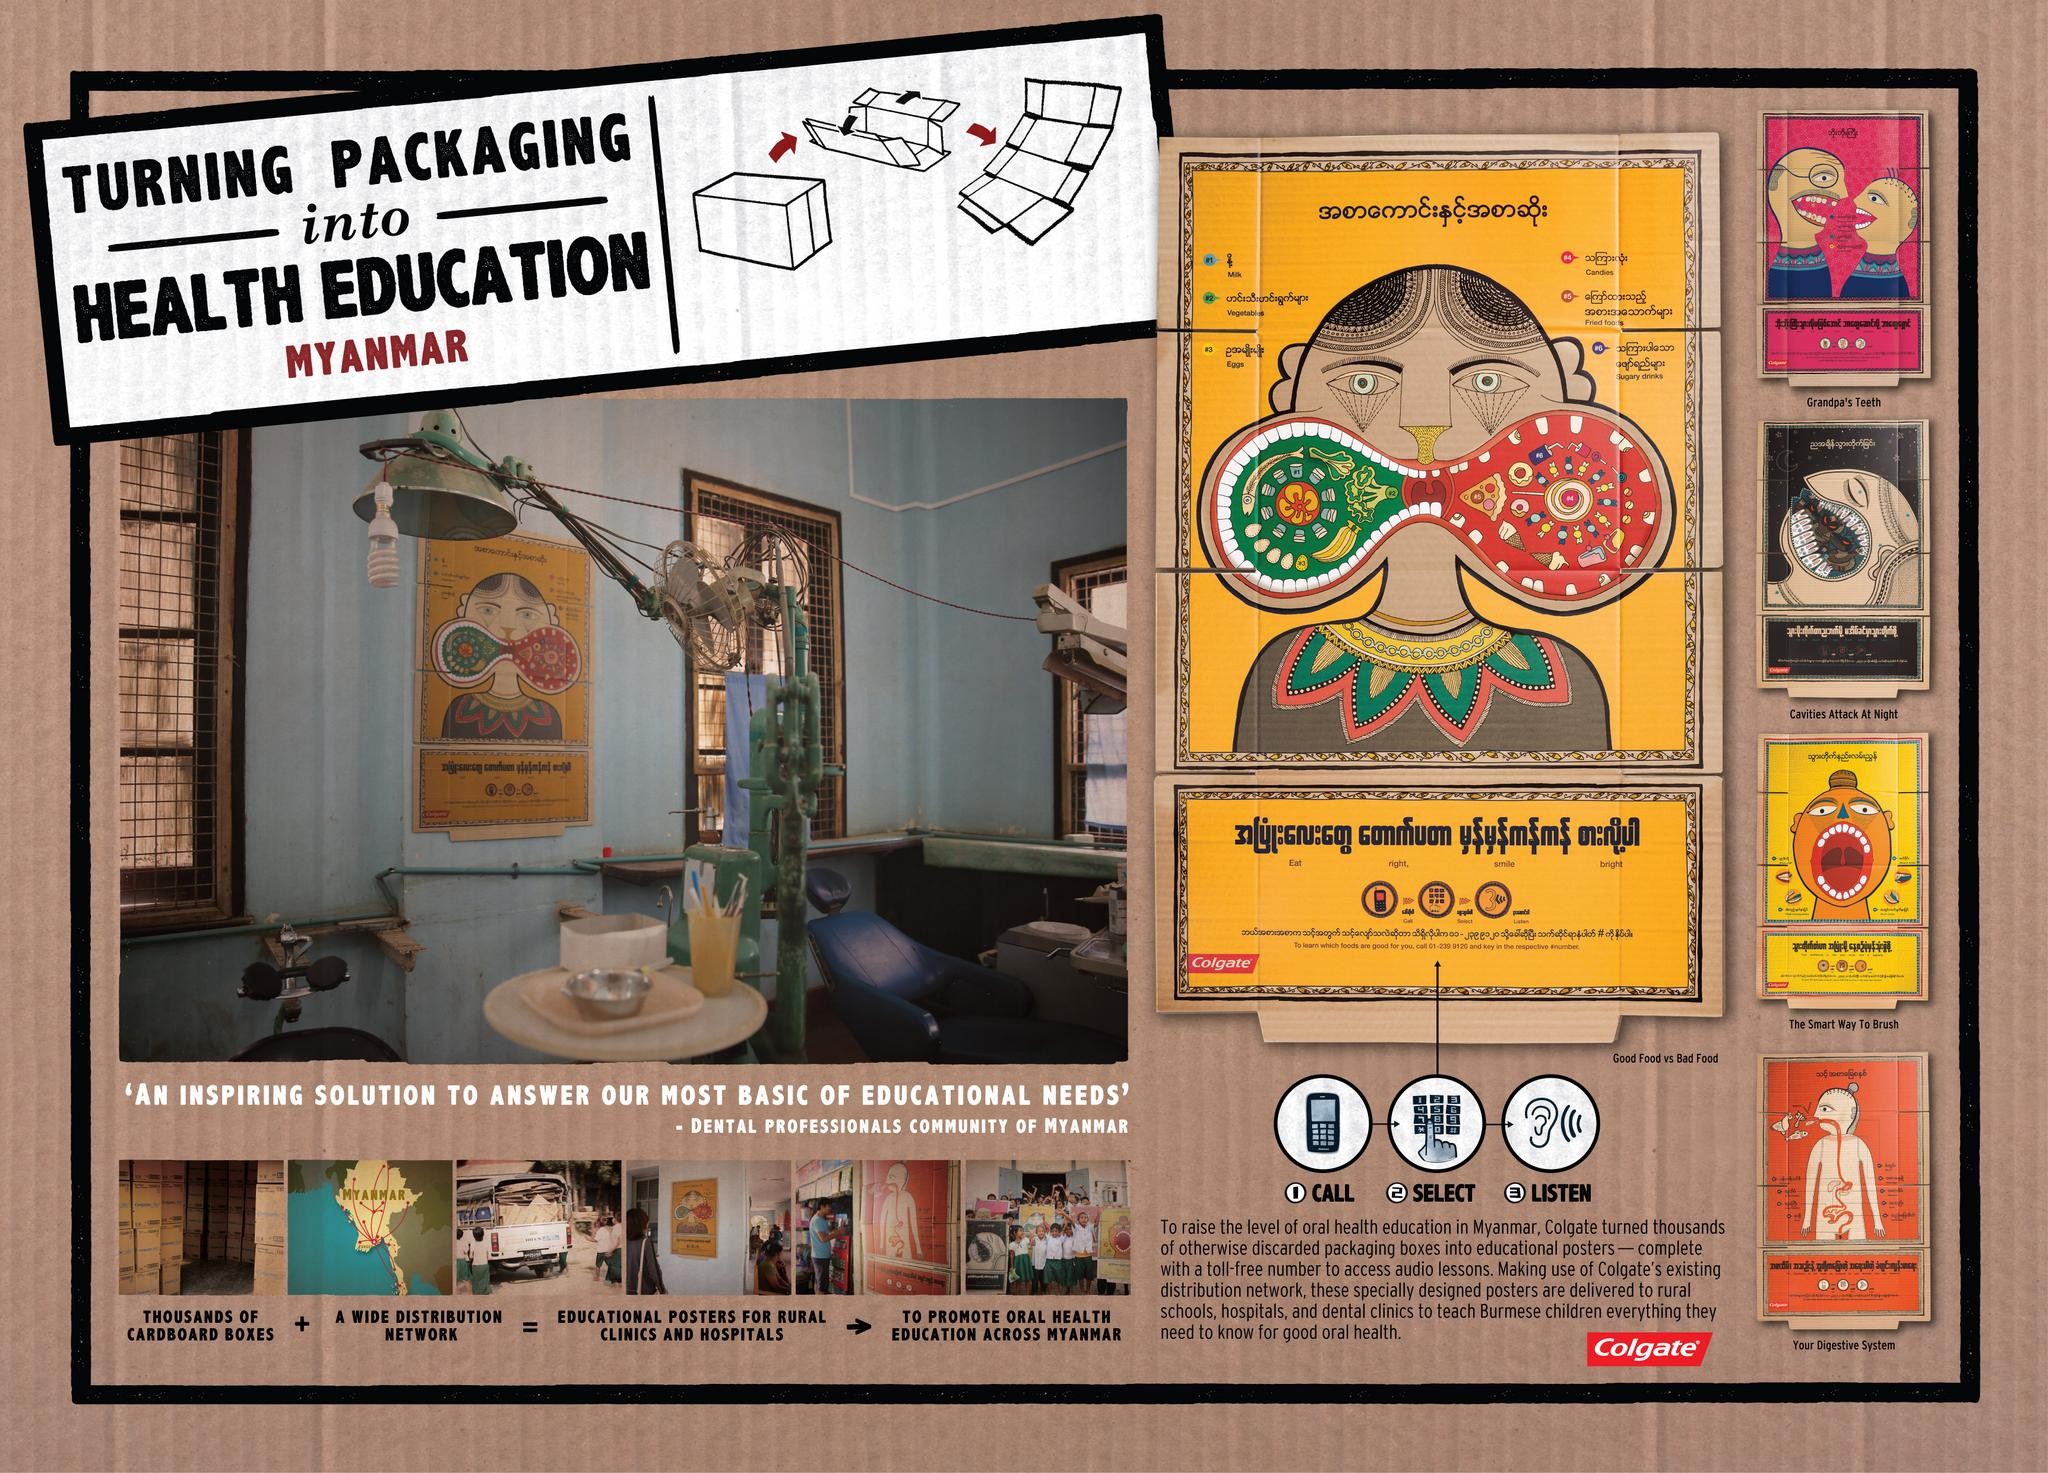 TURNING PACKAGING INTO EDUCATION - YOUR DIGESTIVE SYSTEM